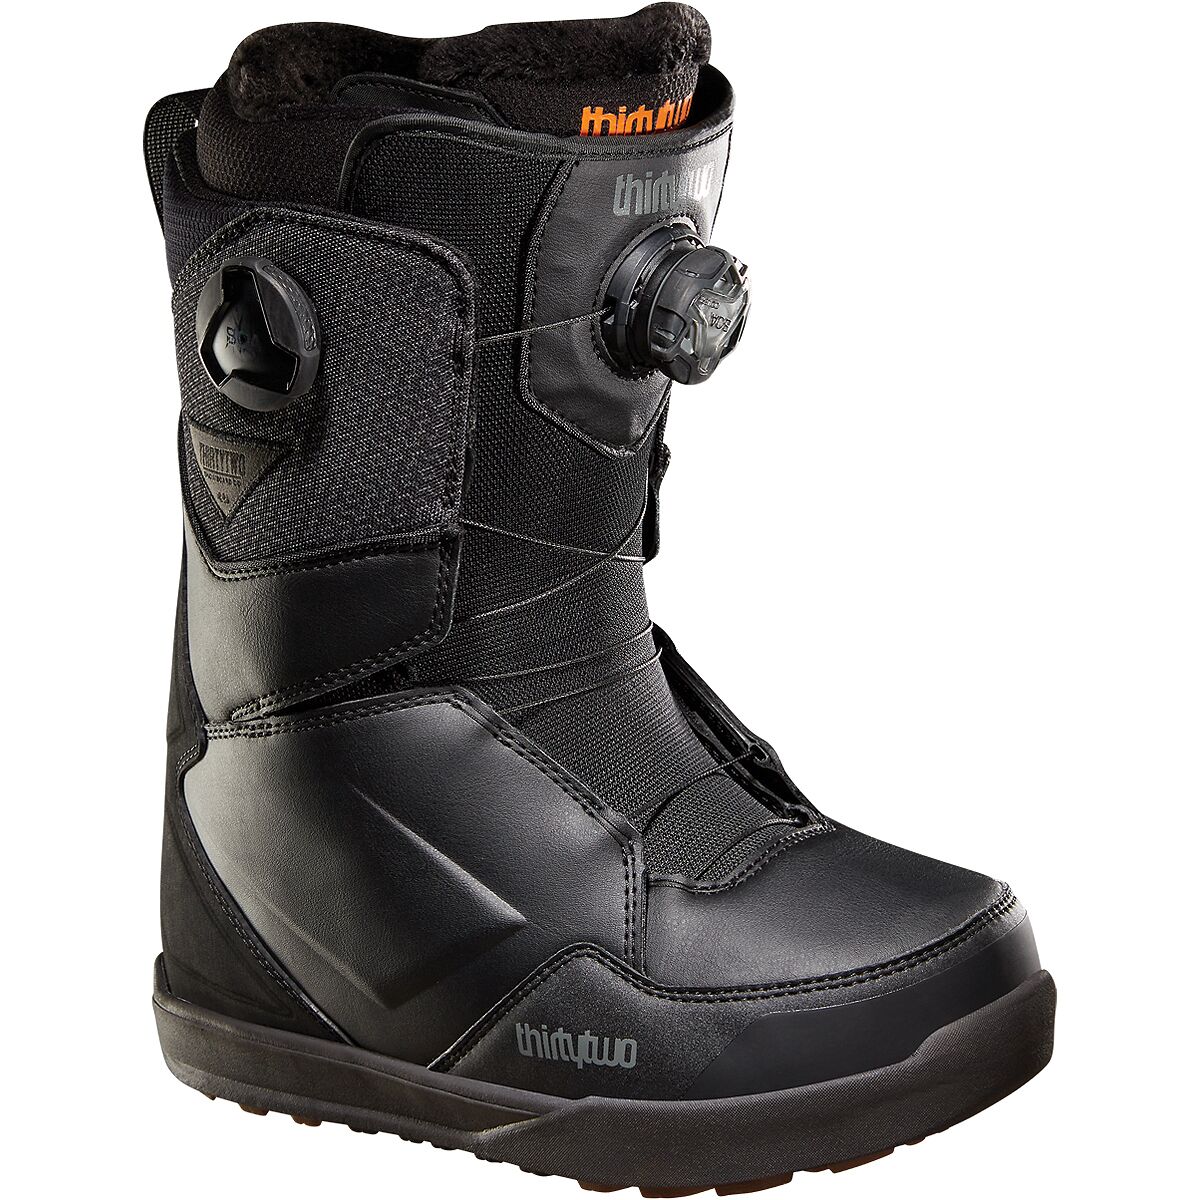 ThirtyTwo Lashed Double BOA Snowboard Boot - 2023 - Women's Black